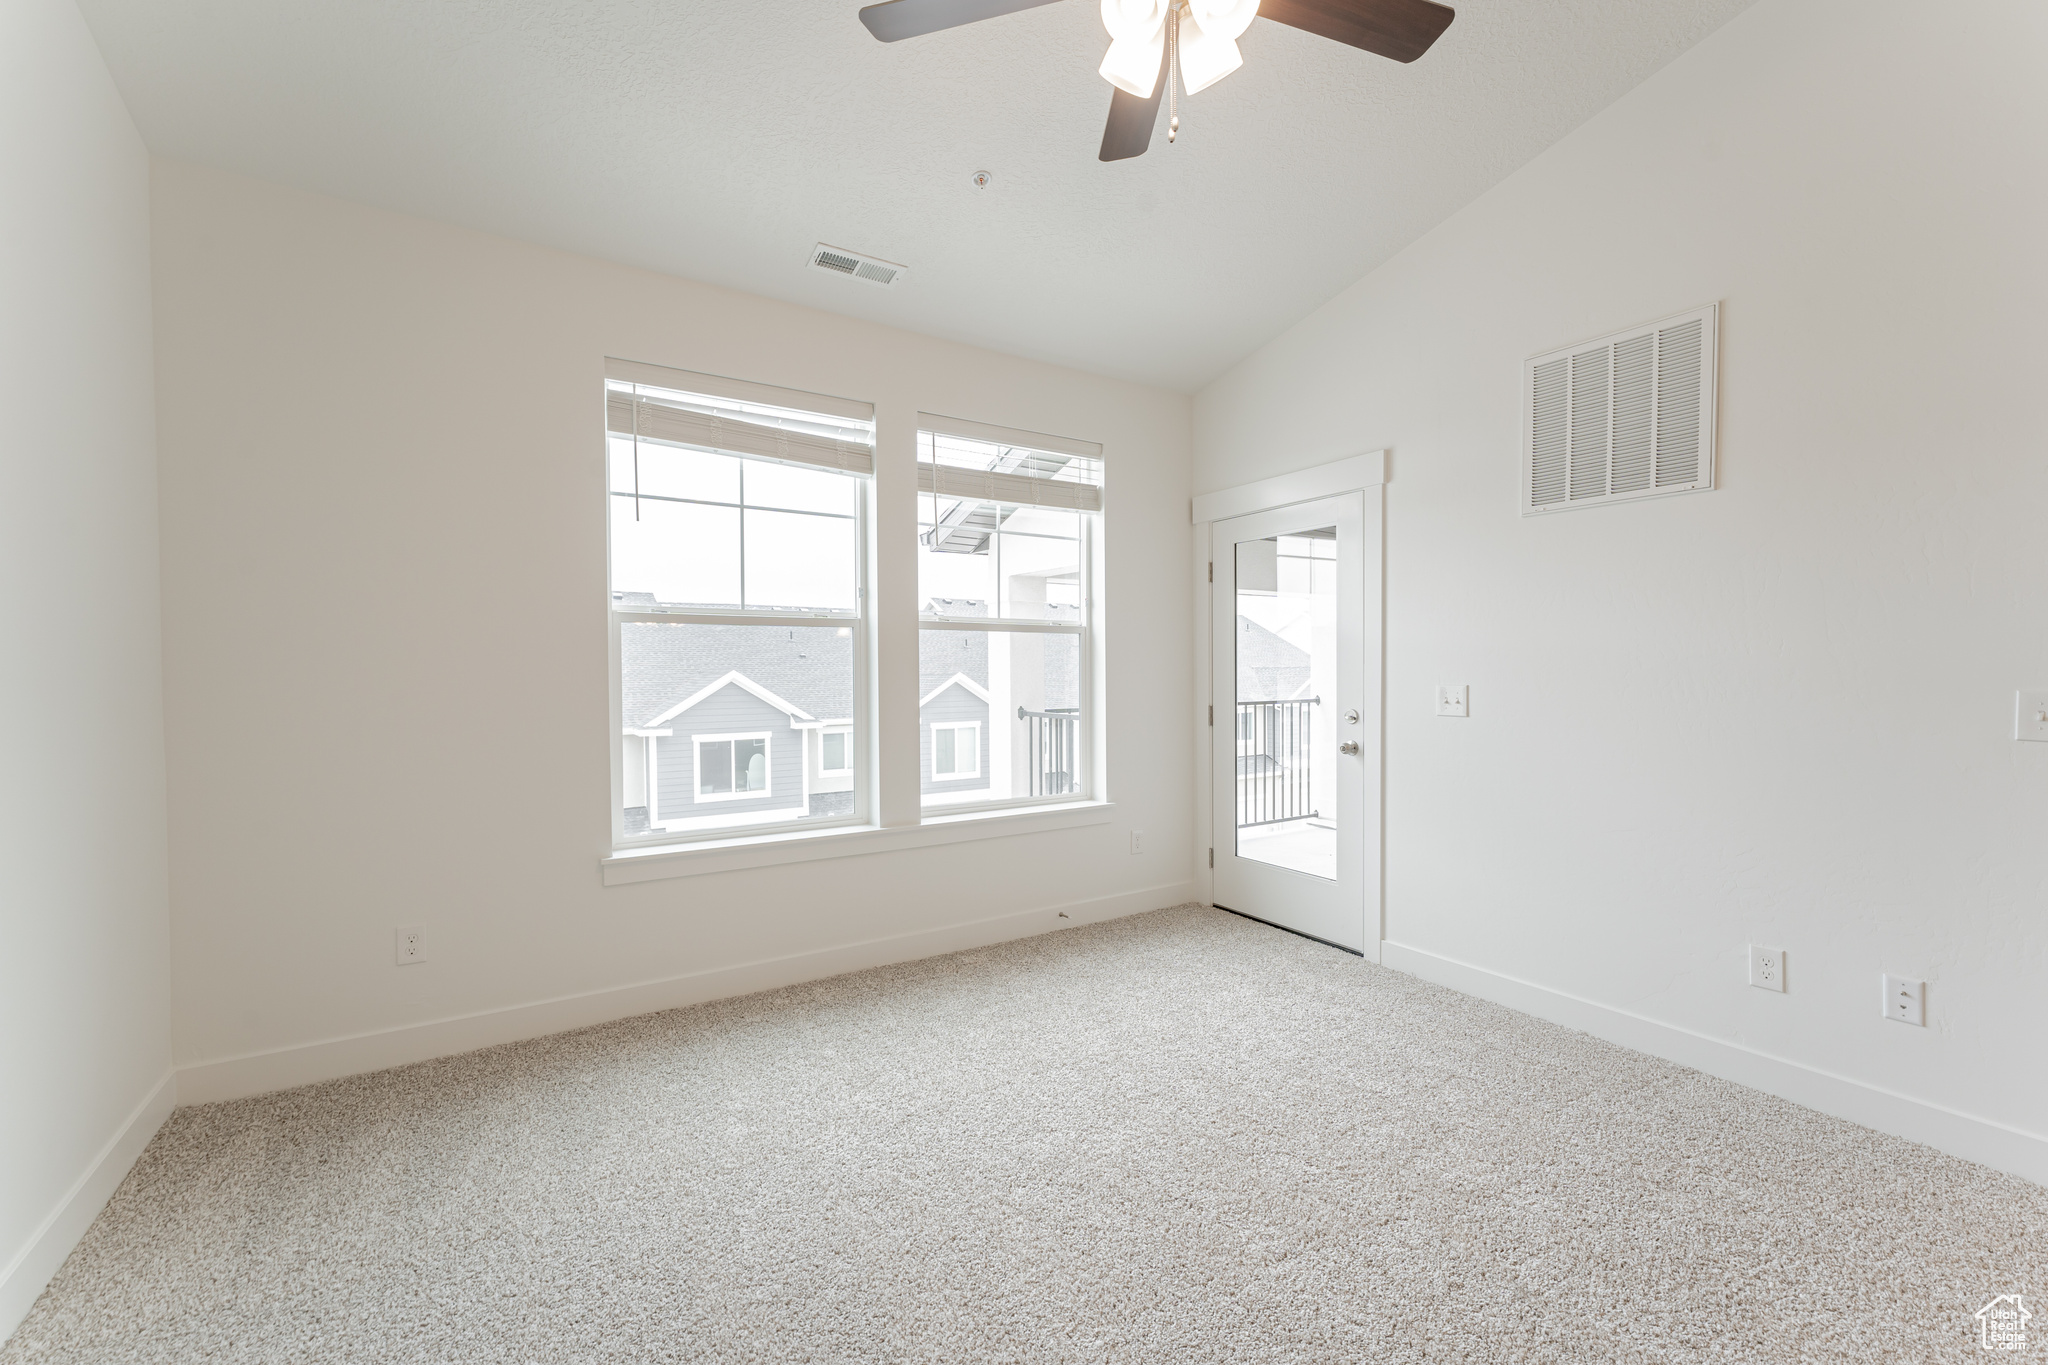 Spare room featuring light carpet, ceiling fan, and vaulted ceiling